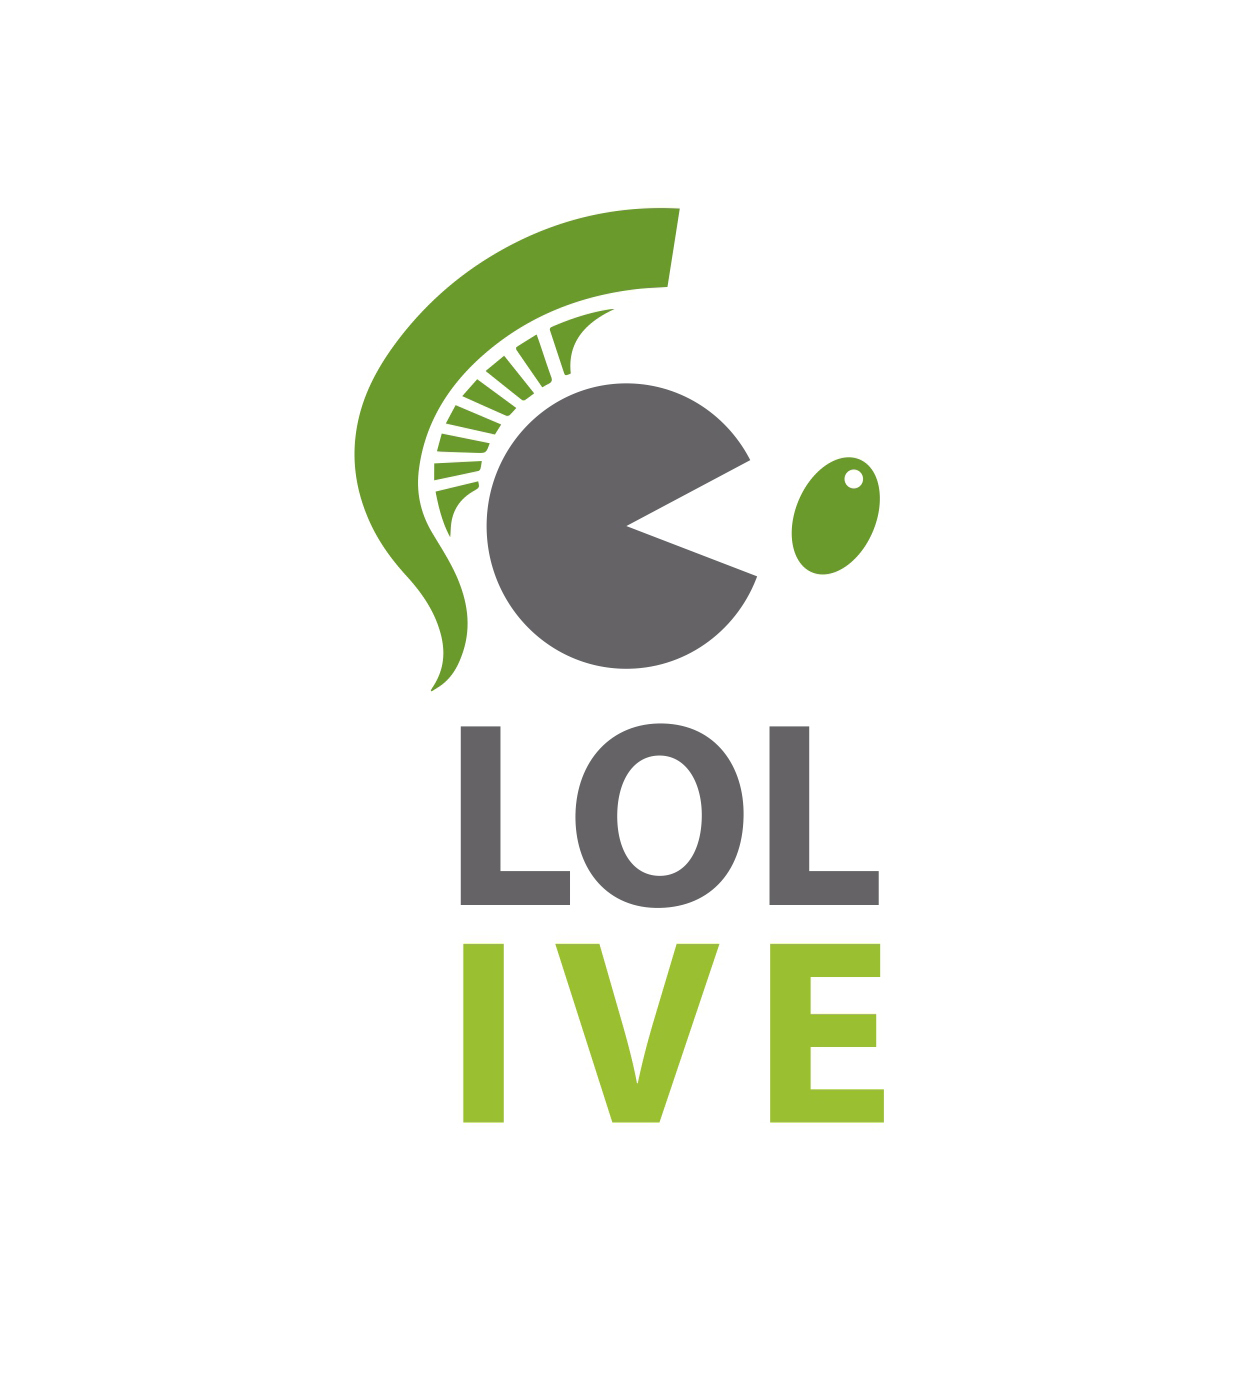 LOLIVE